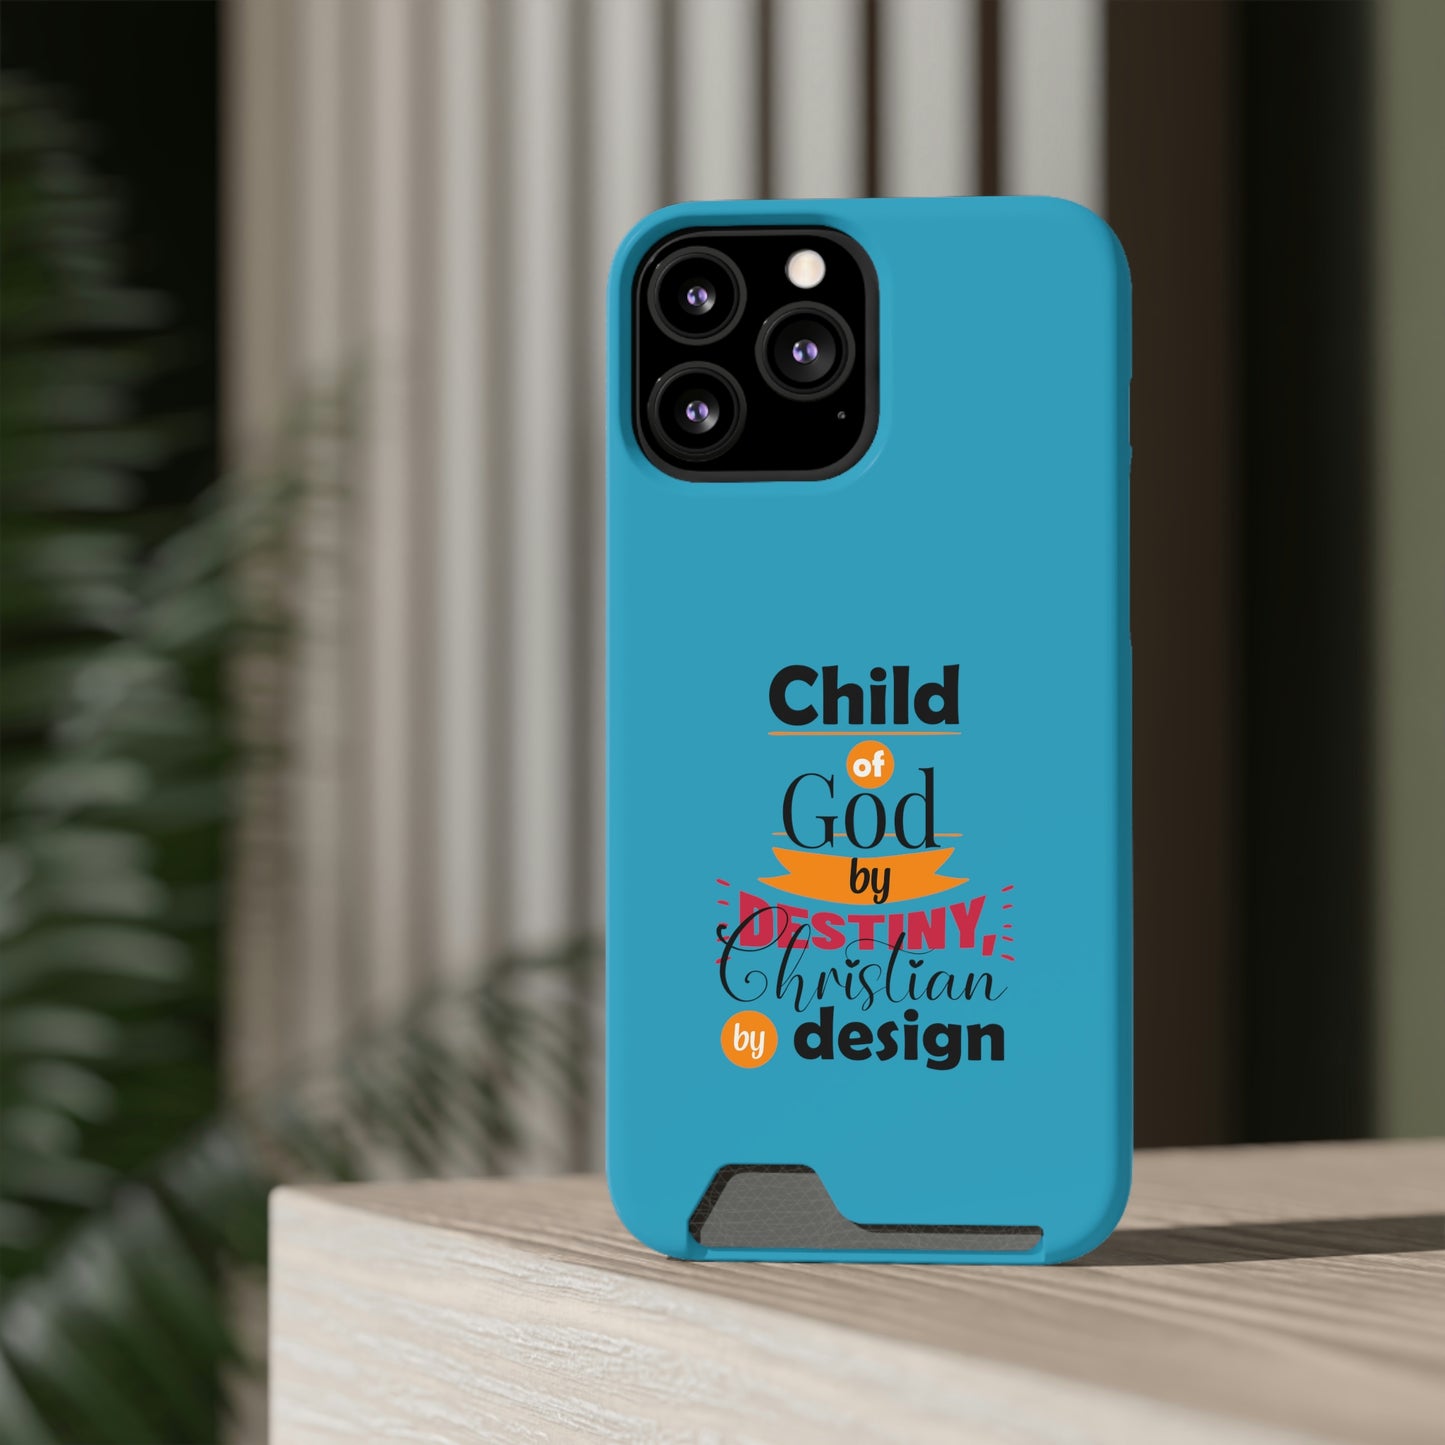 Child Of God By Destiny, Christian By Design Phone Case With Card Holder